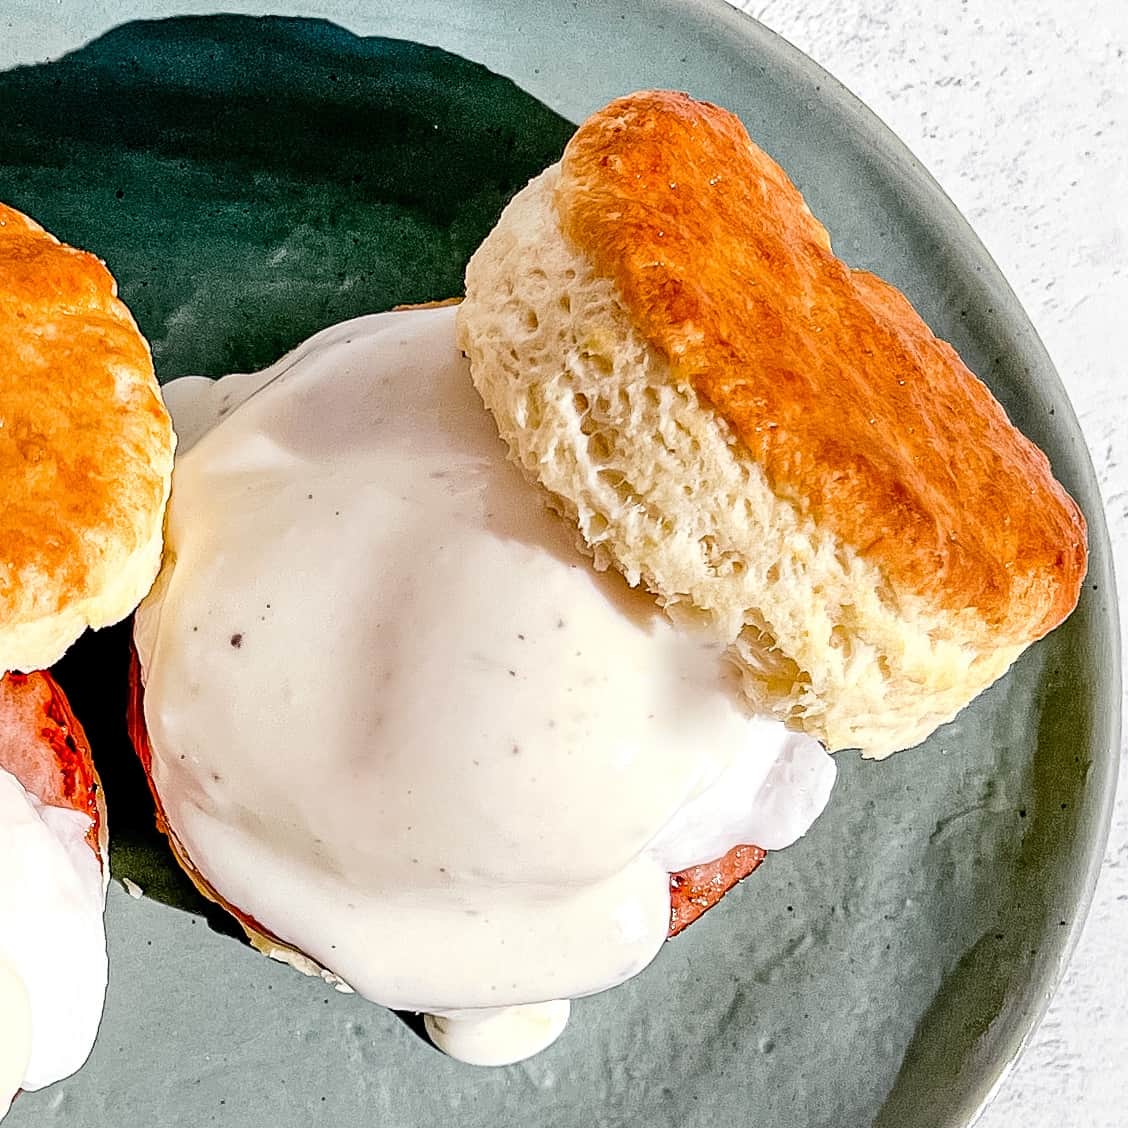 Biscuit eggs benedict on a plate.